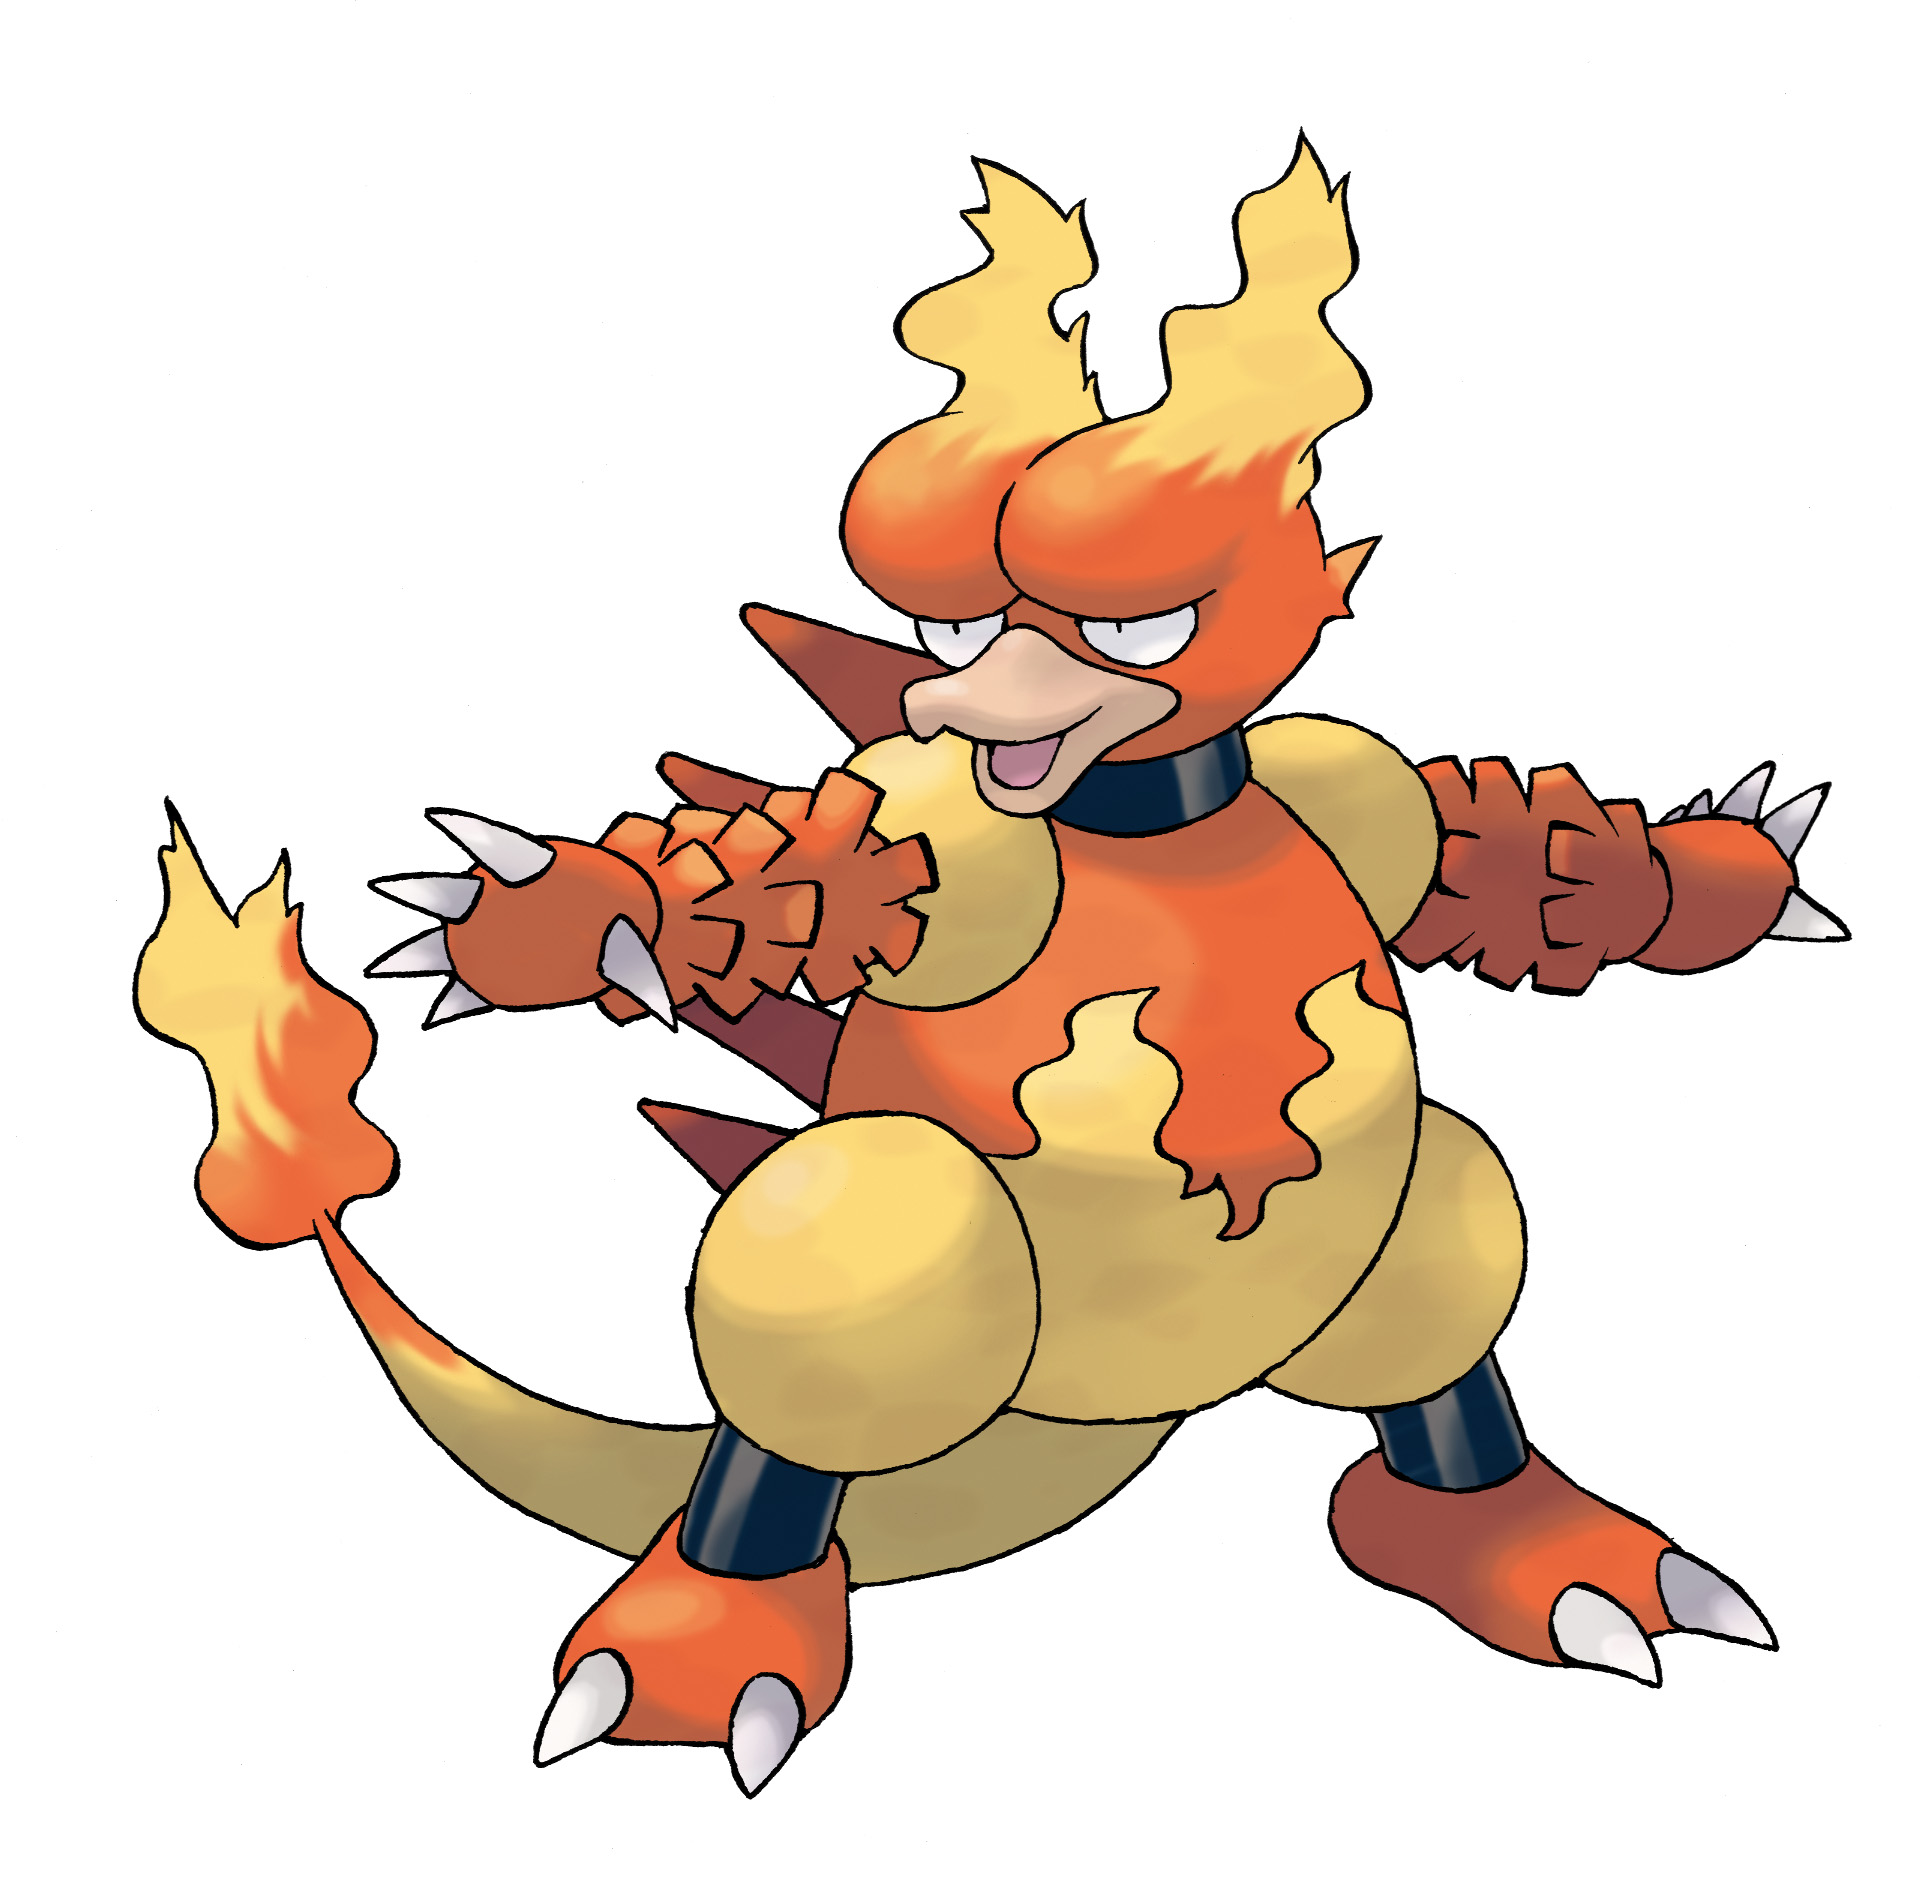 udbrud Fritid velsignelse GAME to distribute Magmar/Electabuzz for Pokemon X/Y